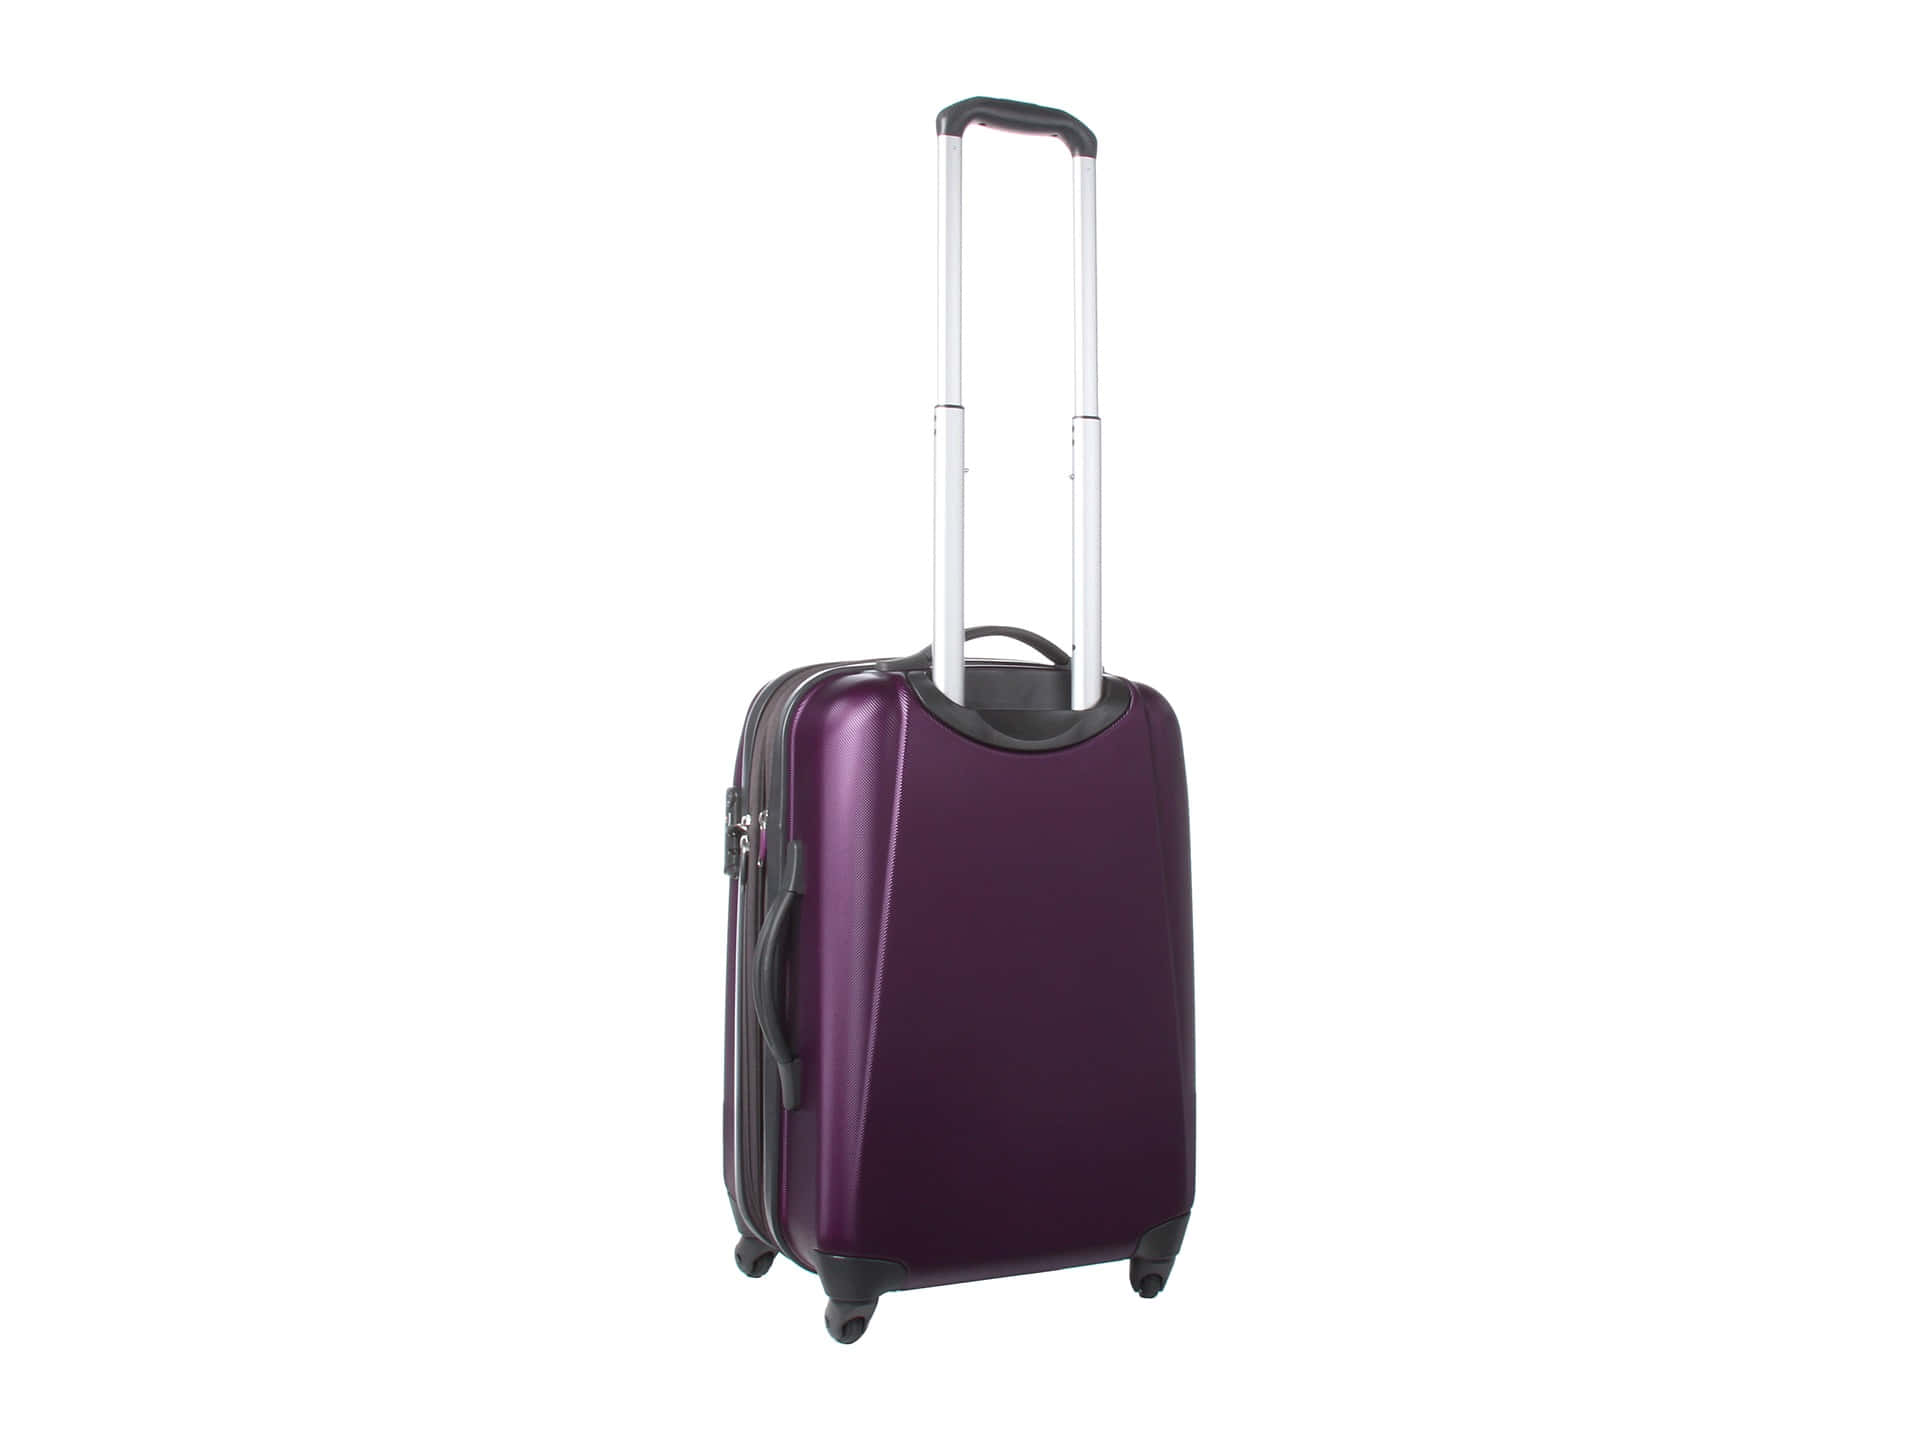 Make a style statement with this fashionable purple luggage. Wallpaper